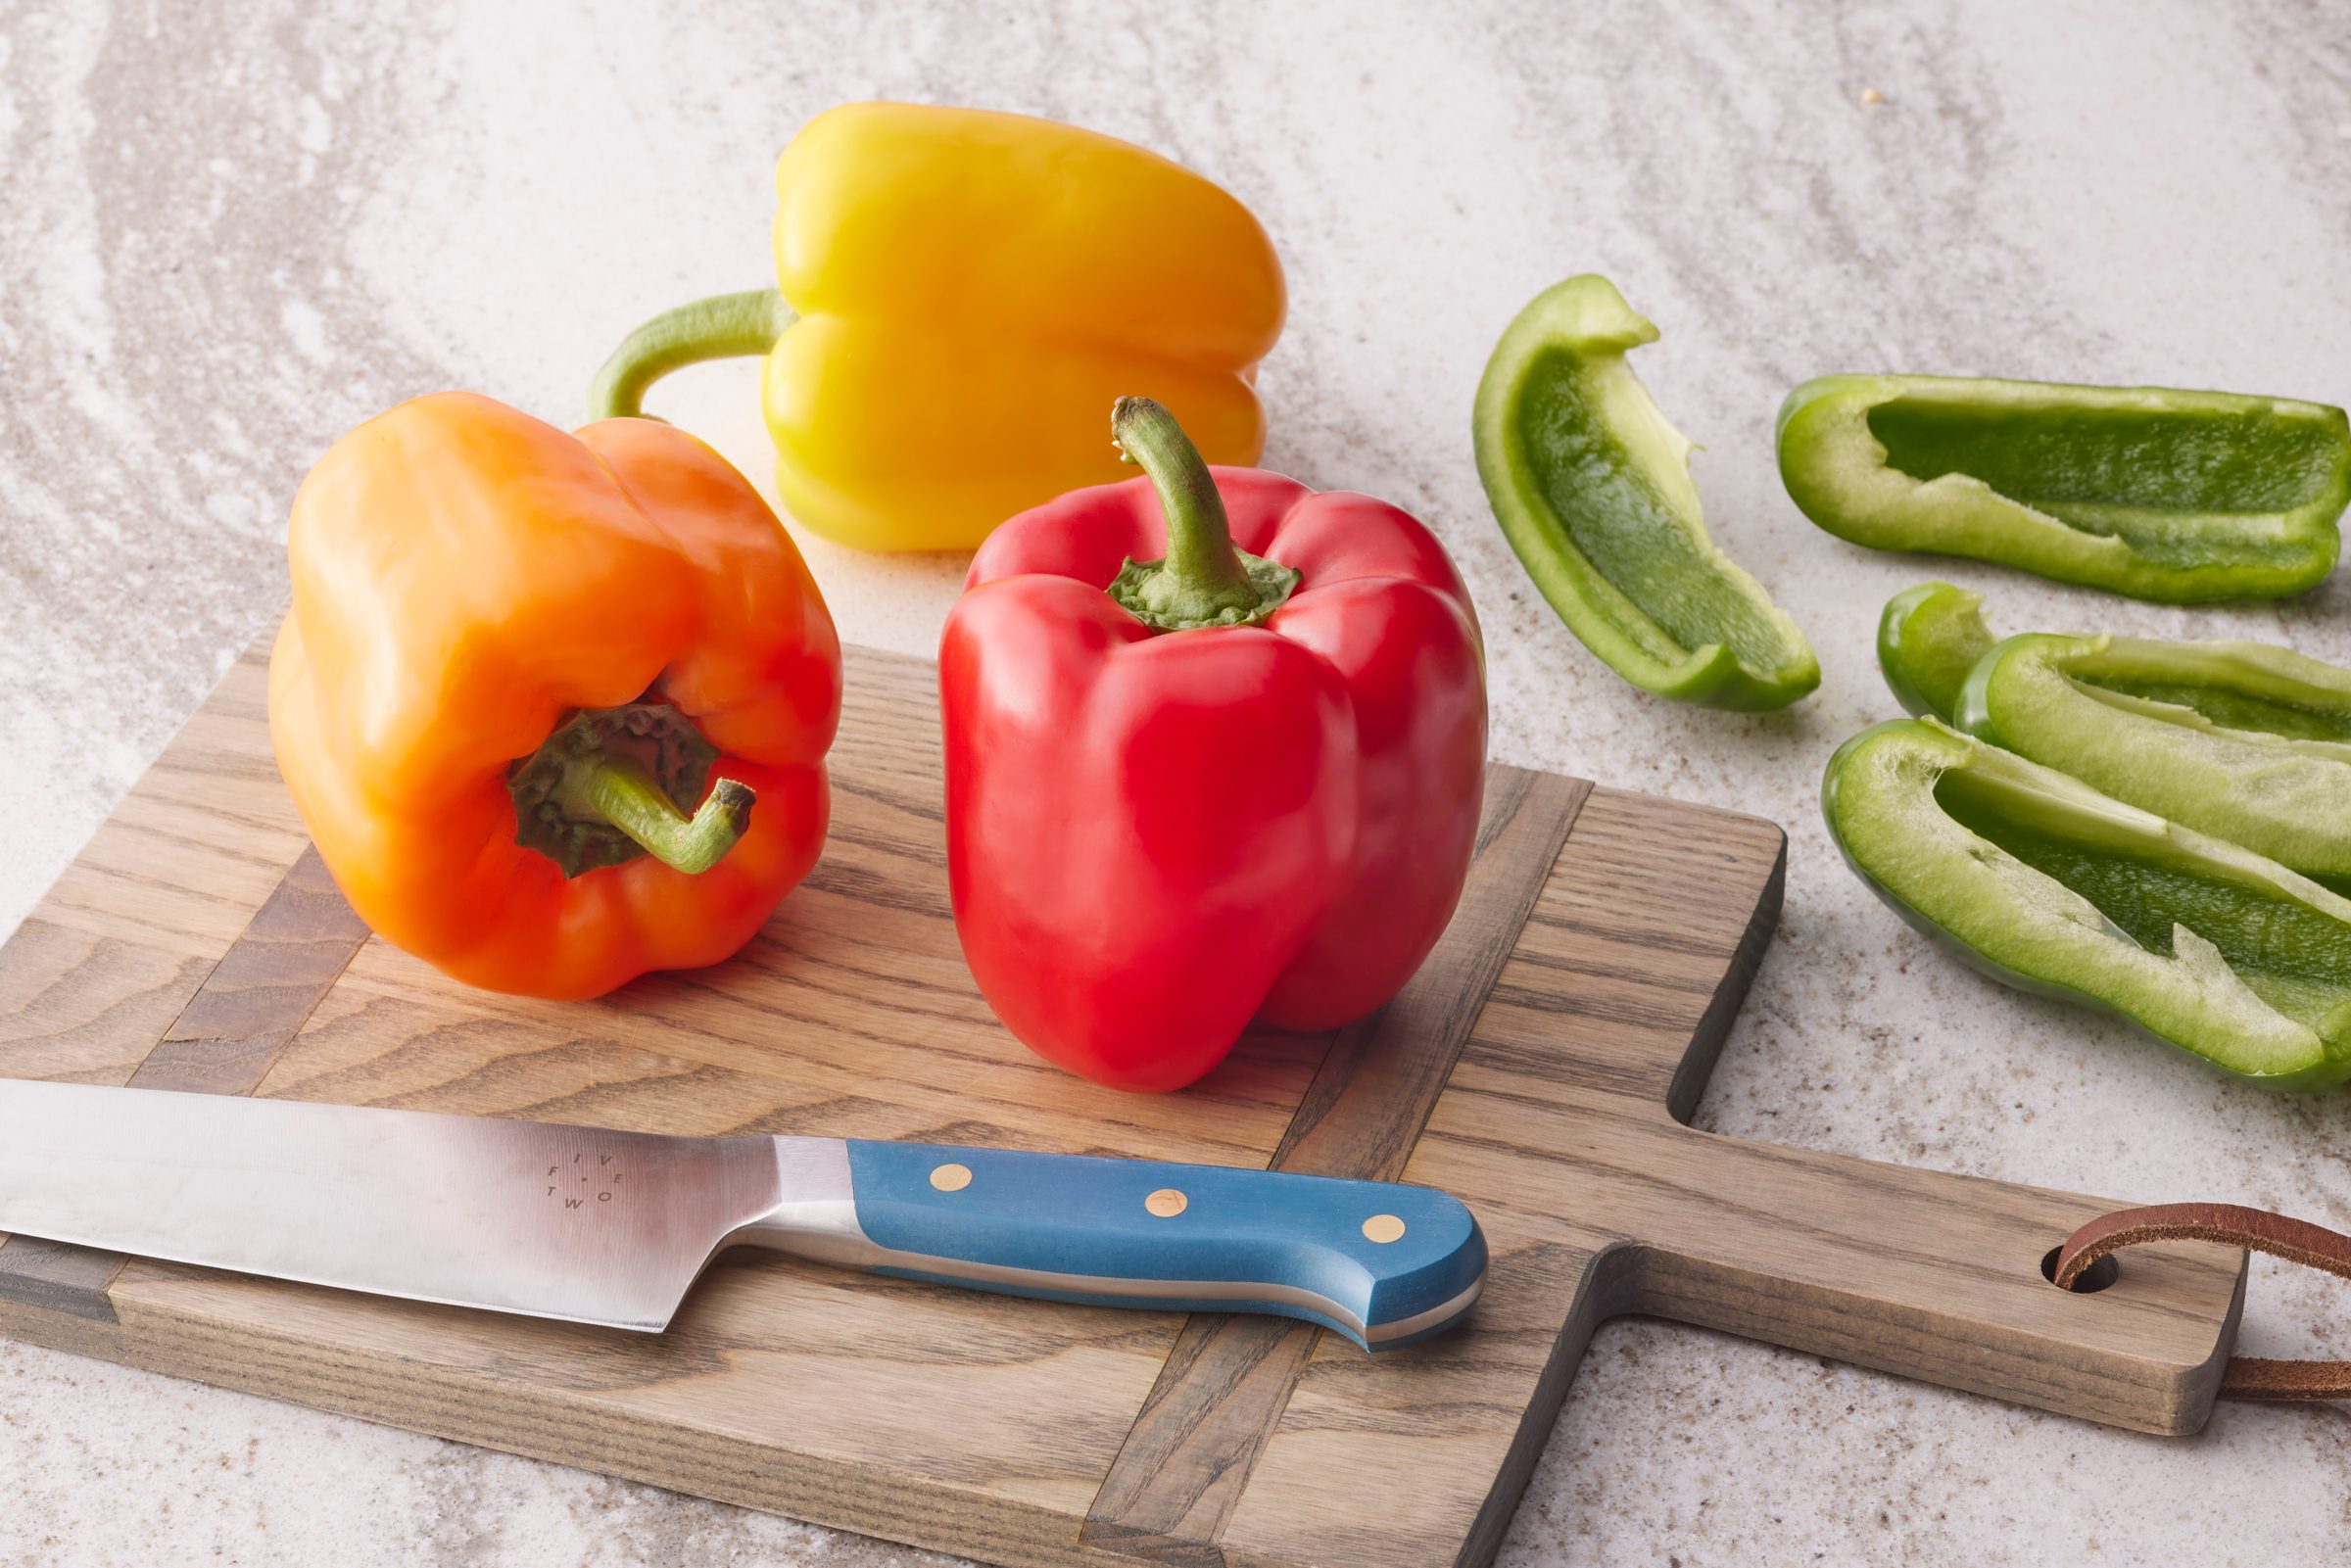 https://www.tasteofhome.com/wp-content/uploads/2021/03/TOHcom23_PU6007_DR_03_07_13b.-How-to-Cut-a-Bell-Pepper-Without-Any-Waste.jpg